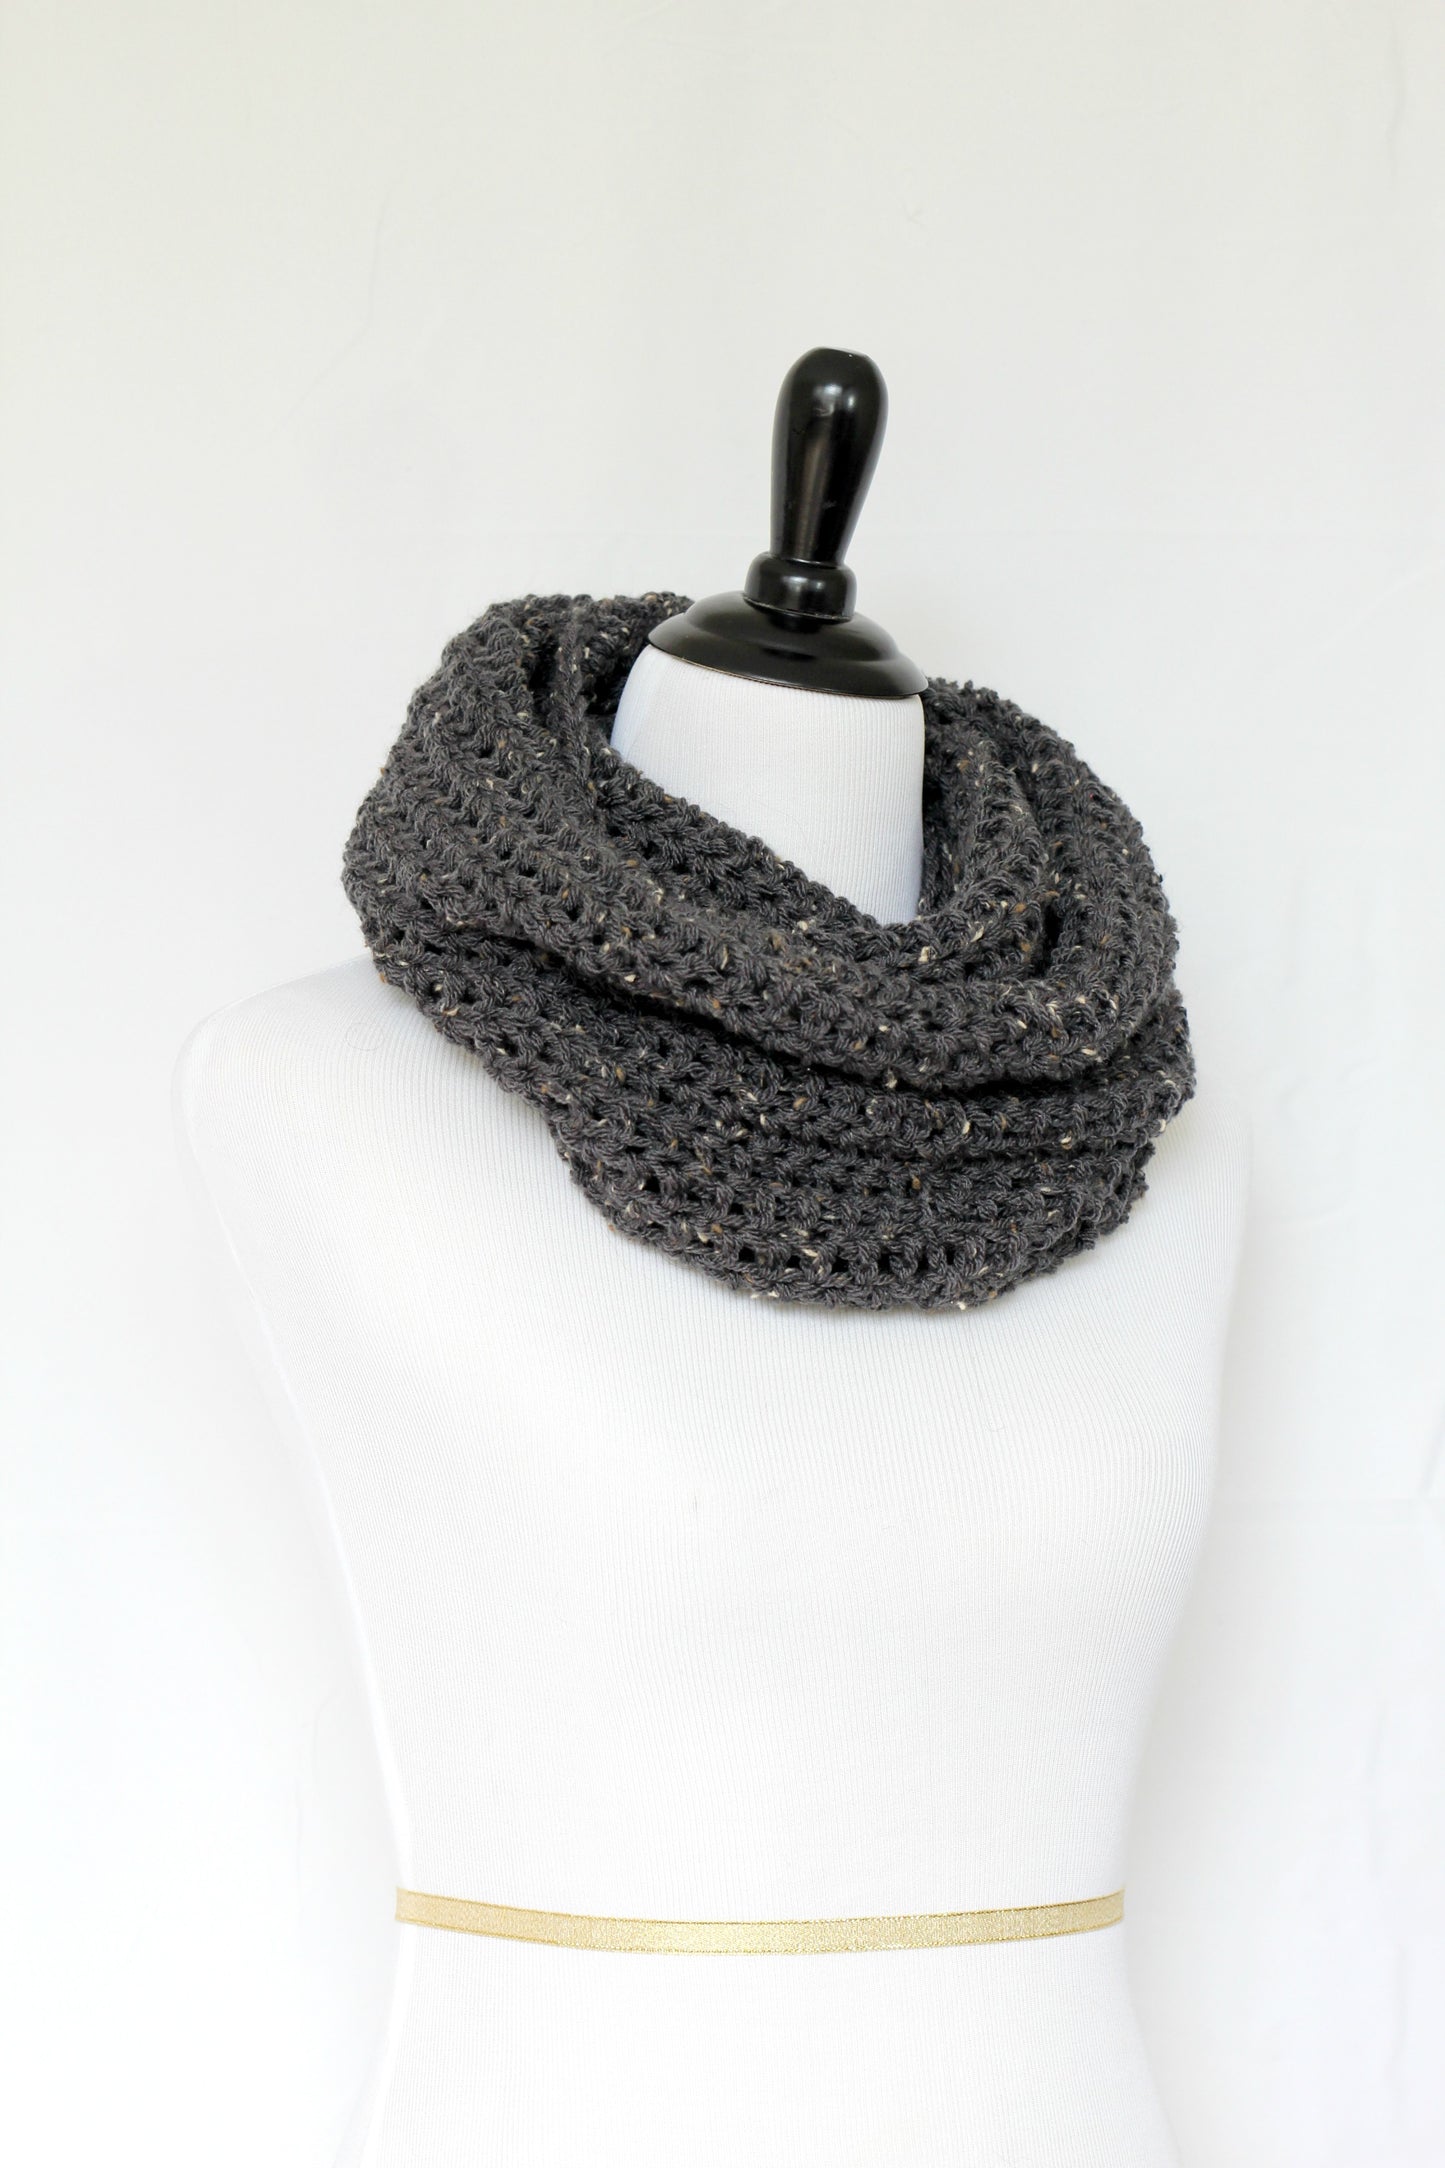 Crochet cowl in dark grey color, chunky infinity scarf - 12 colors available